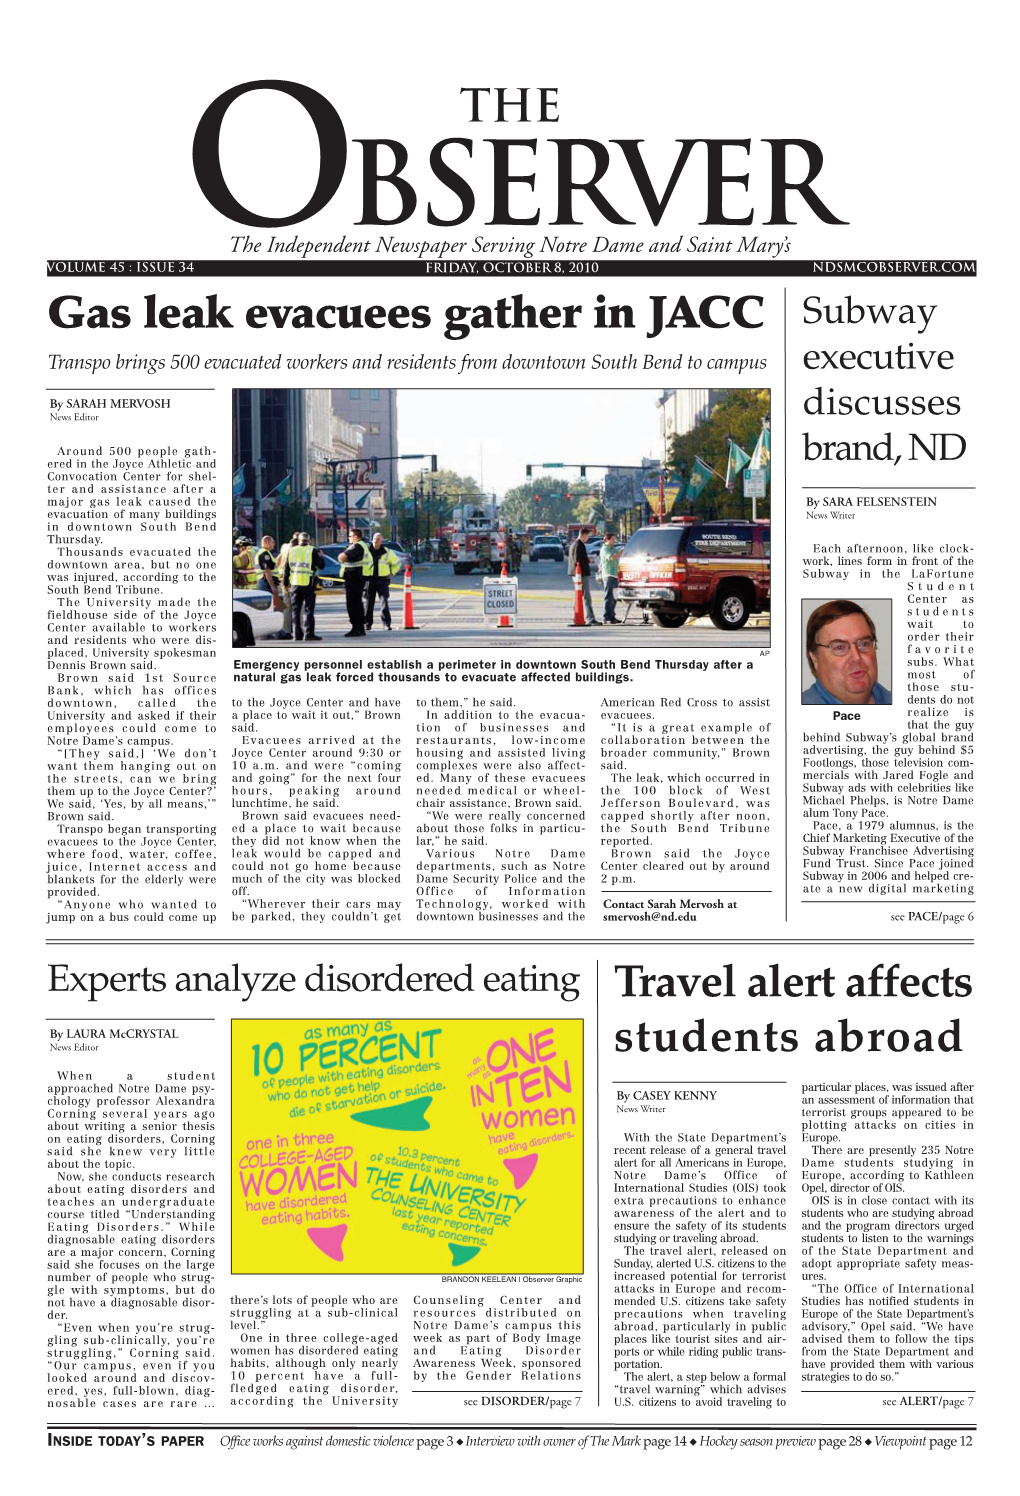 Gas Leak Evacuees Gather in JACC Travel Alert Affects Students Abroad